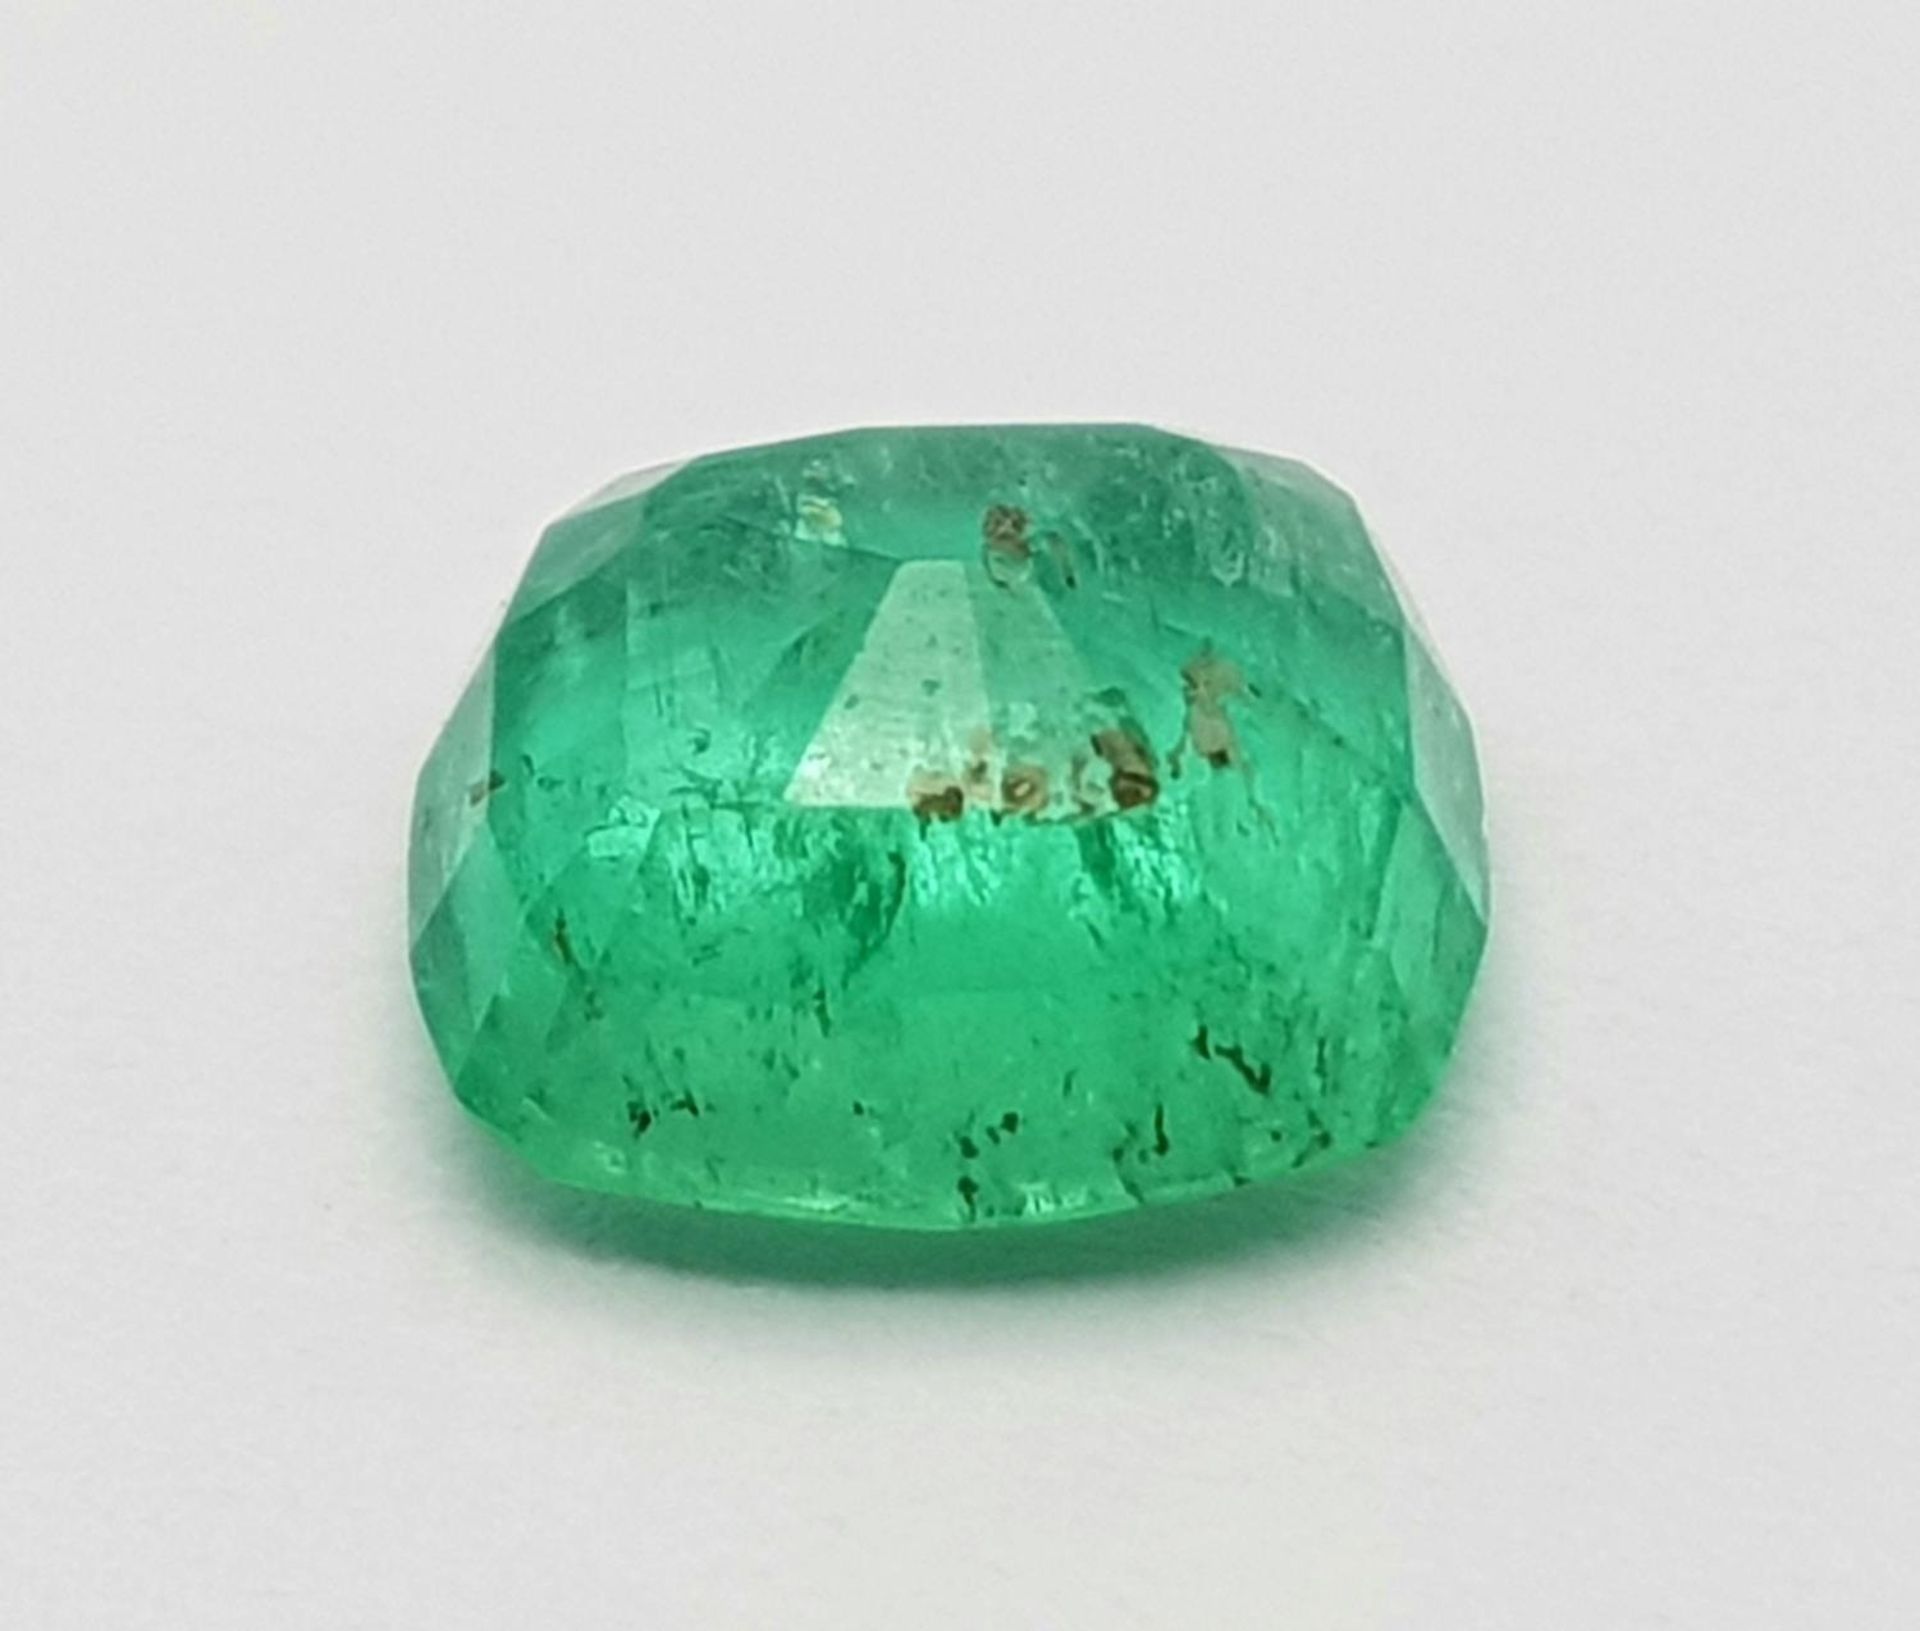 A 1.56ct Afghanistan Panjsher Mines Rare Emerald - GFCO Swiss Certified. - Image 3 of 5